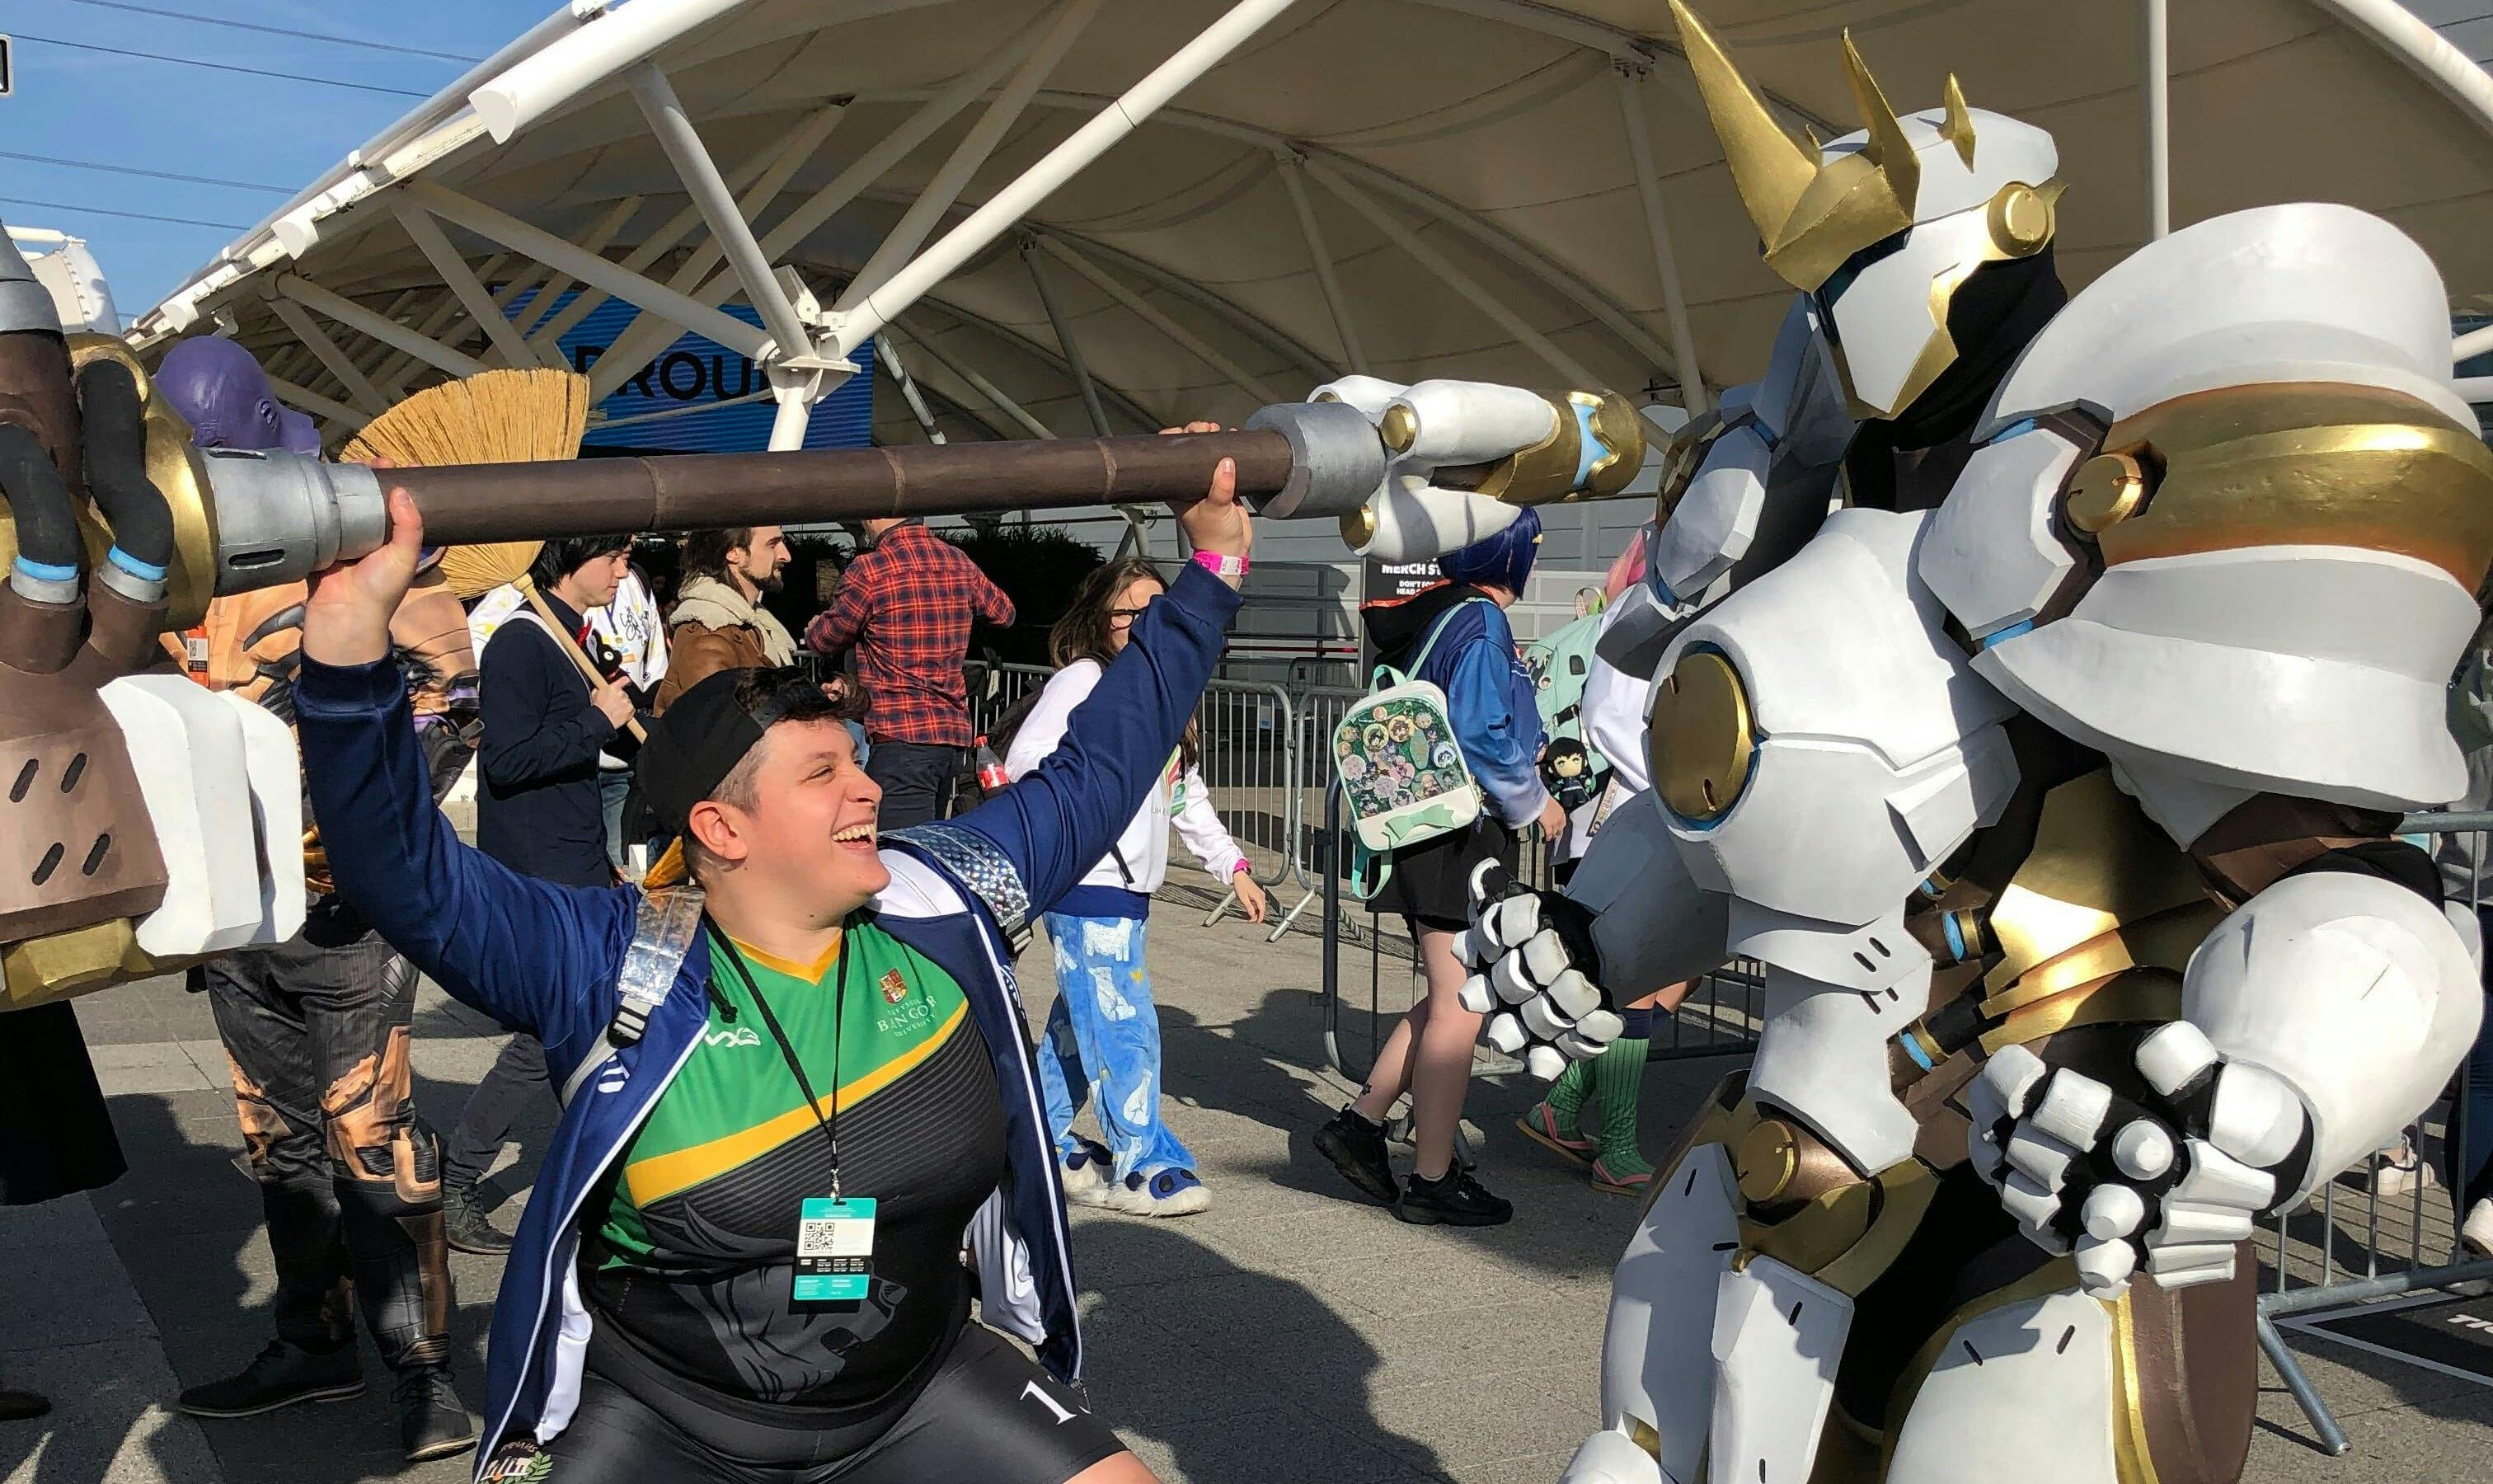 Chloe Durkin, Clubs Director, Squats outside ComicCon, facing off against someone in a white Mecha suit.